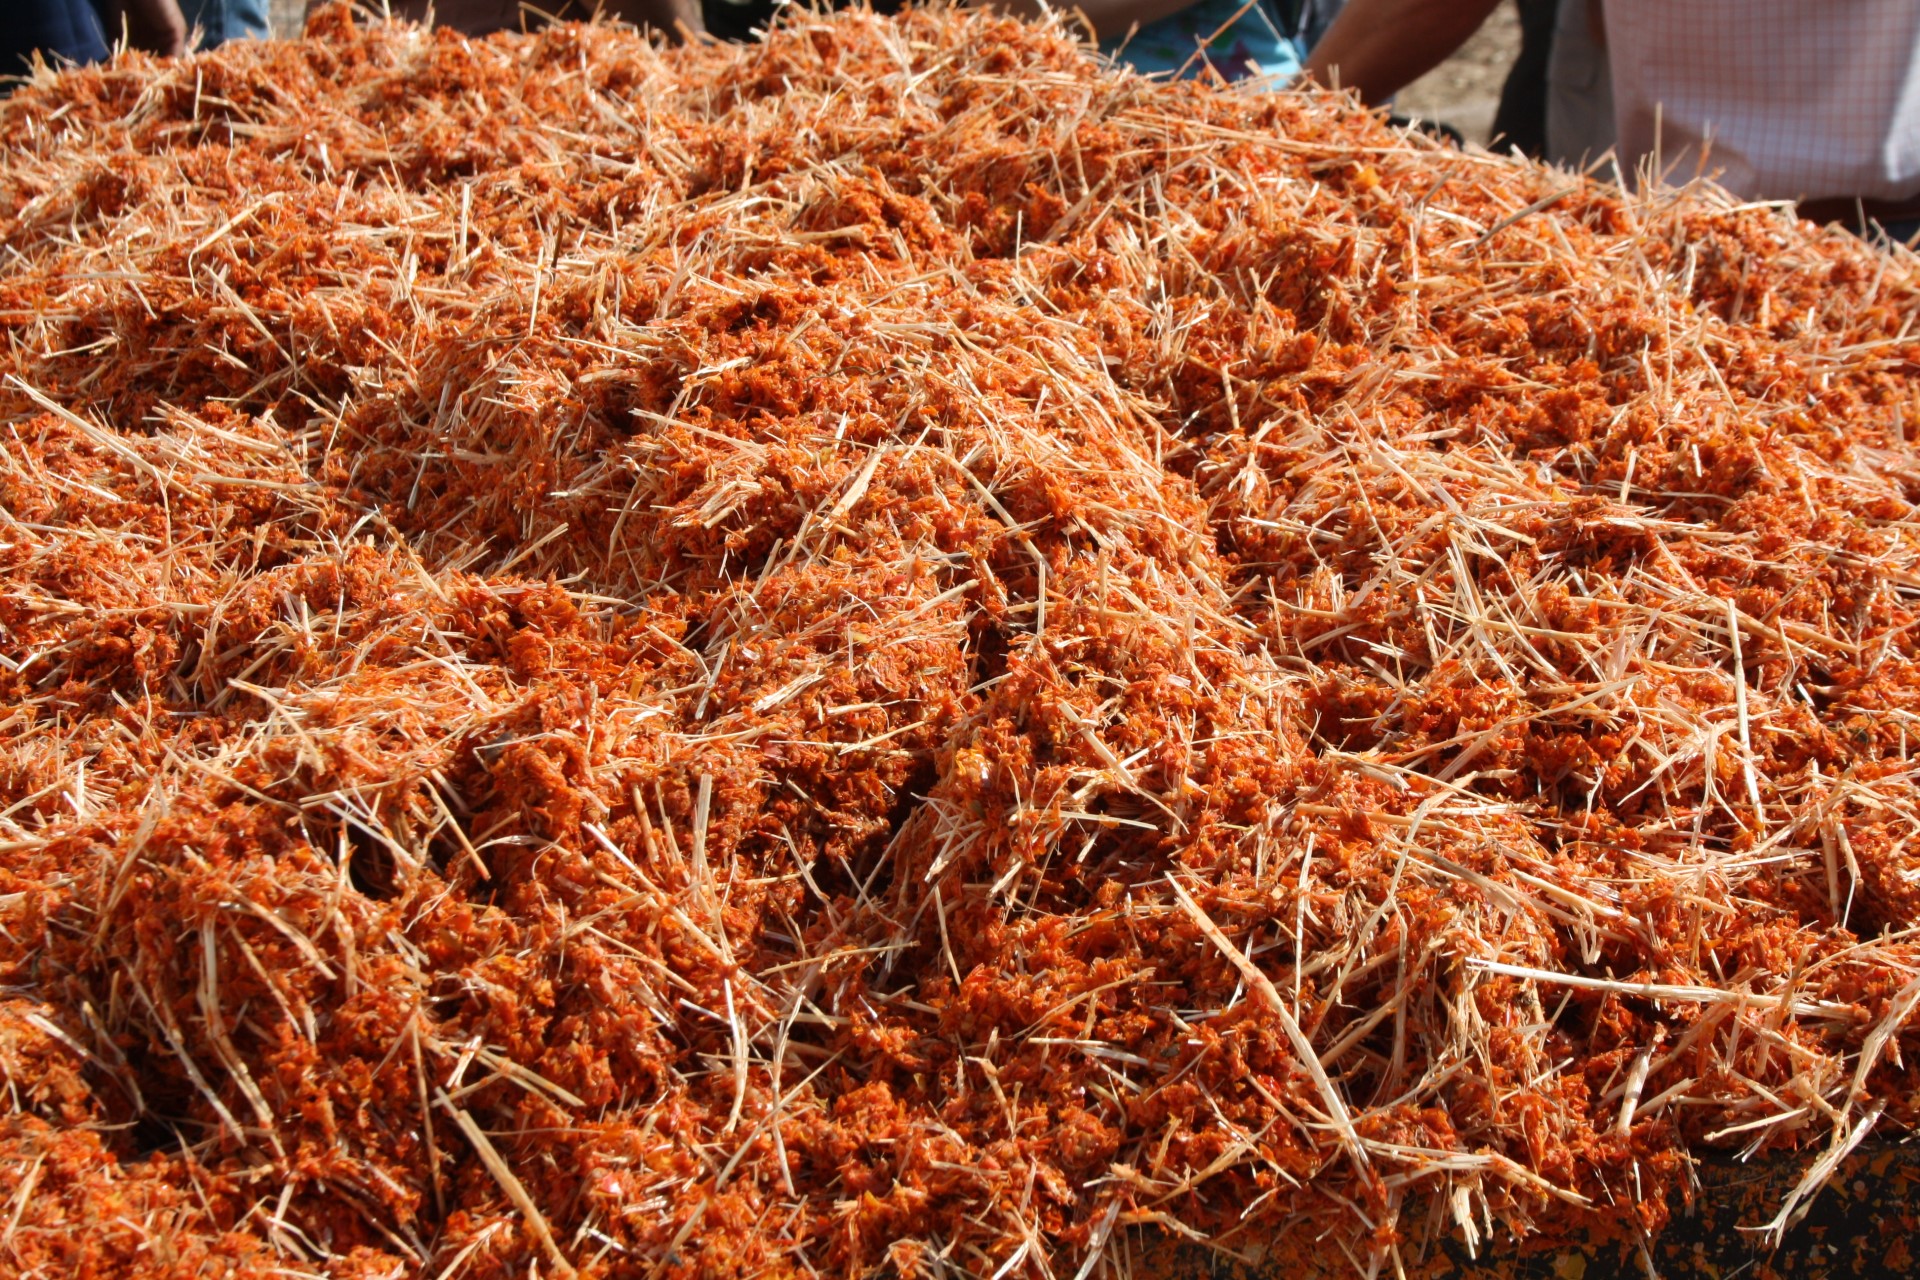 Use of the by-products of the agri-food industry in animal feed (tomato pulp mixed with straw)